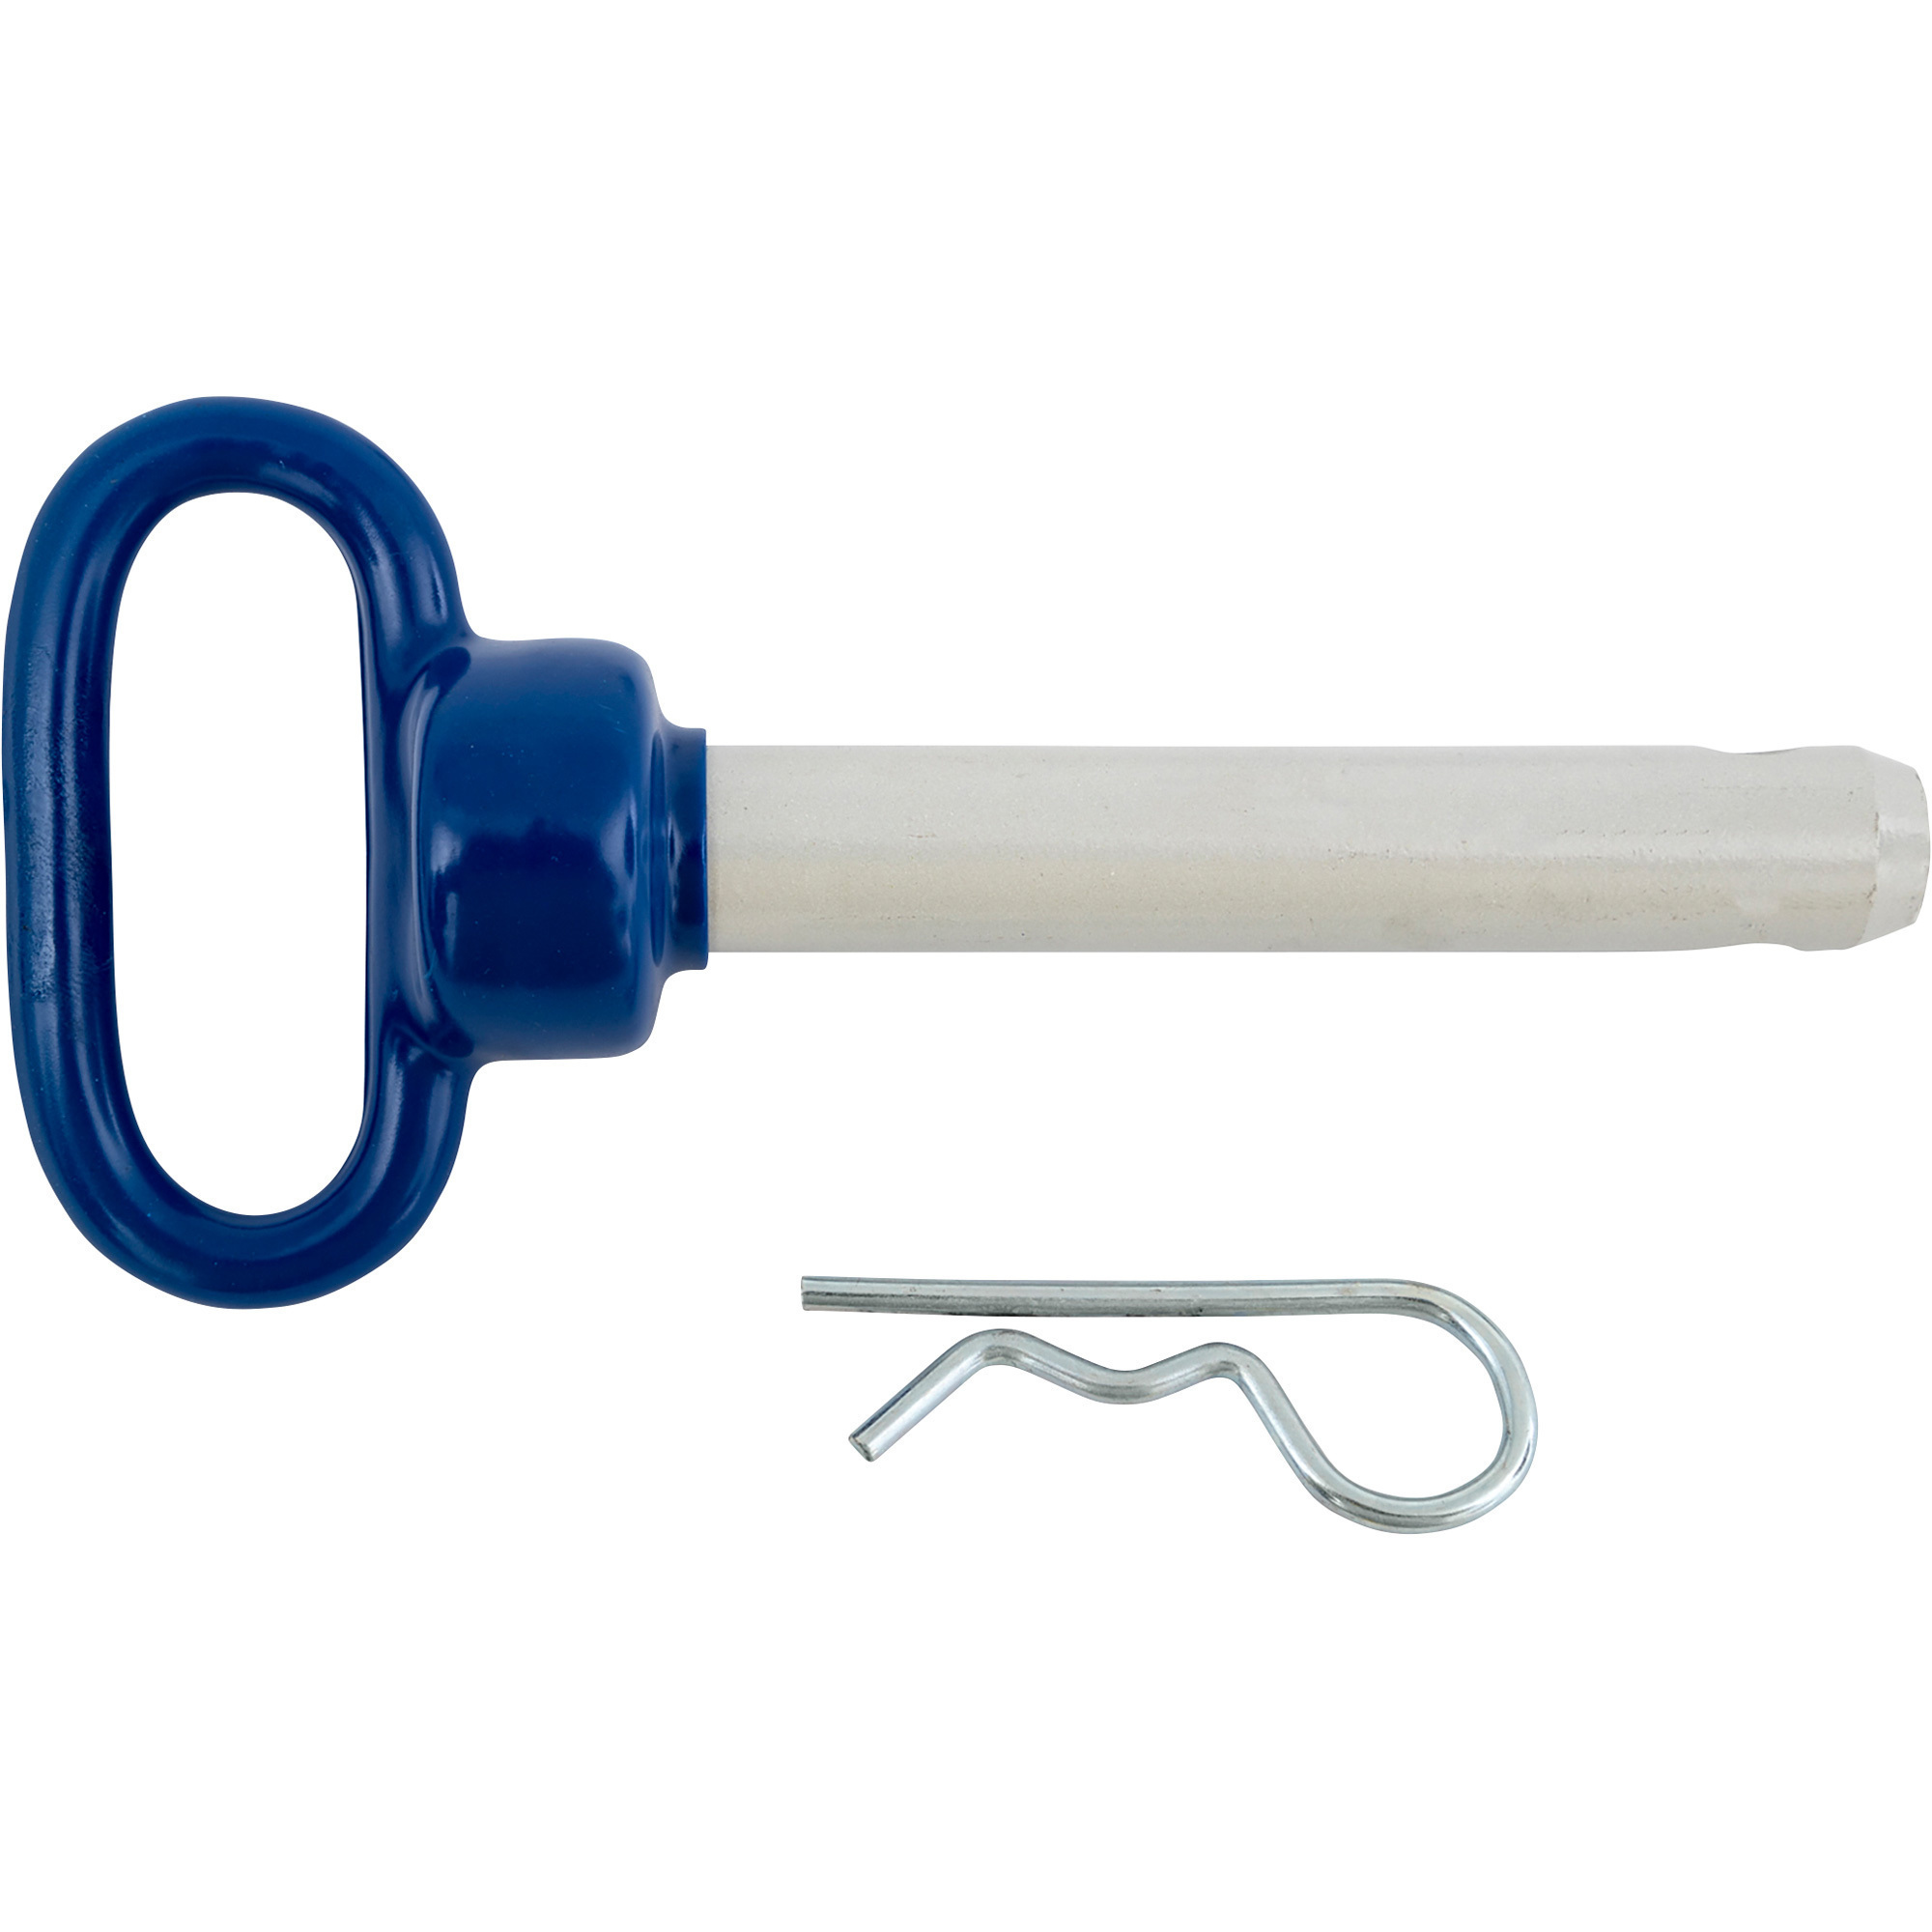 Buyers Products Steel Hitch Pin with Blue Poly-Coated Handle, 7/8Inch x 4 1/2Inch Usable Length, Model # 66122